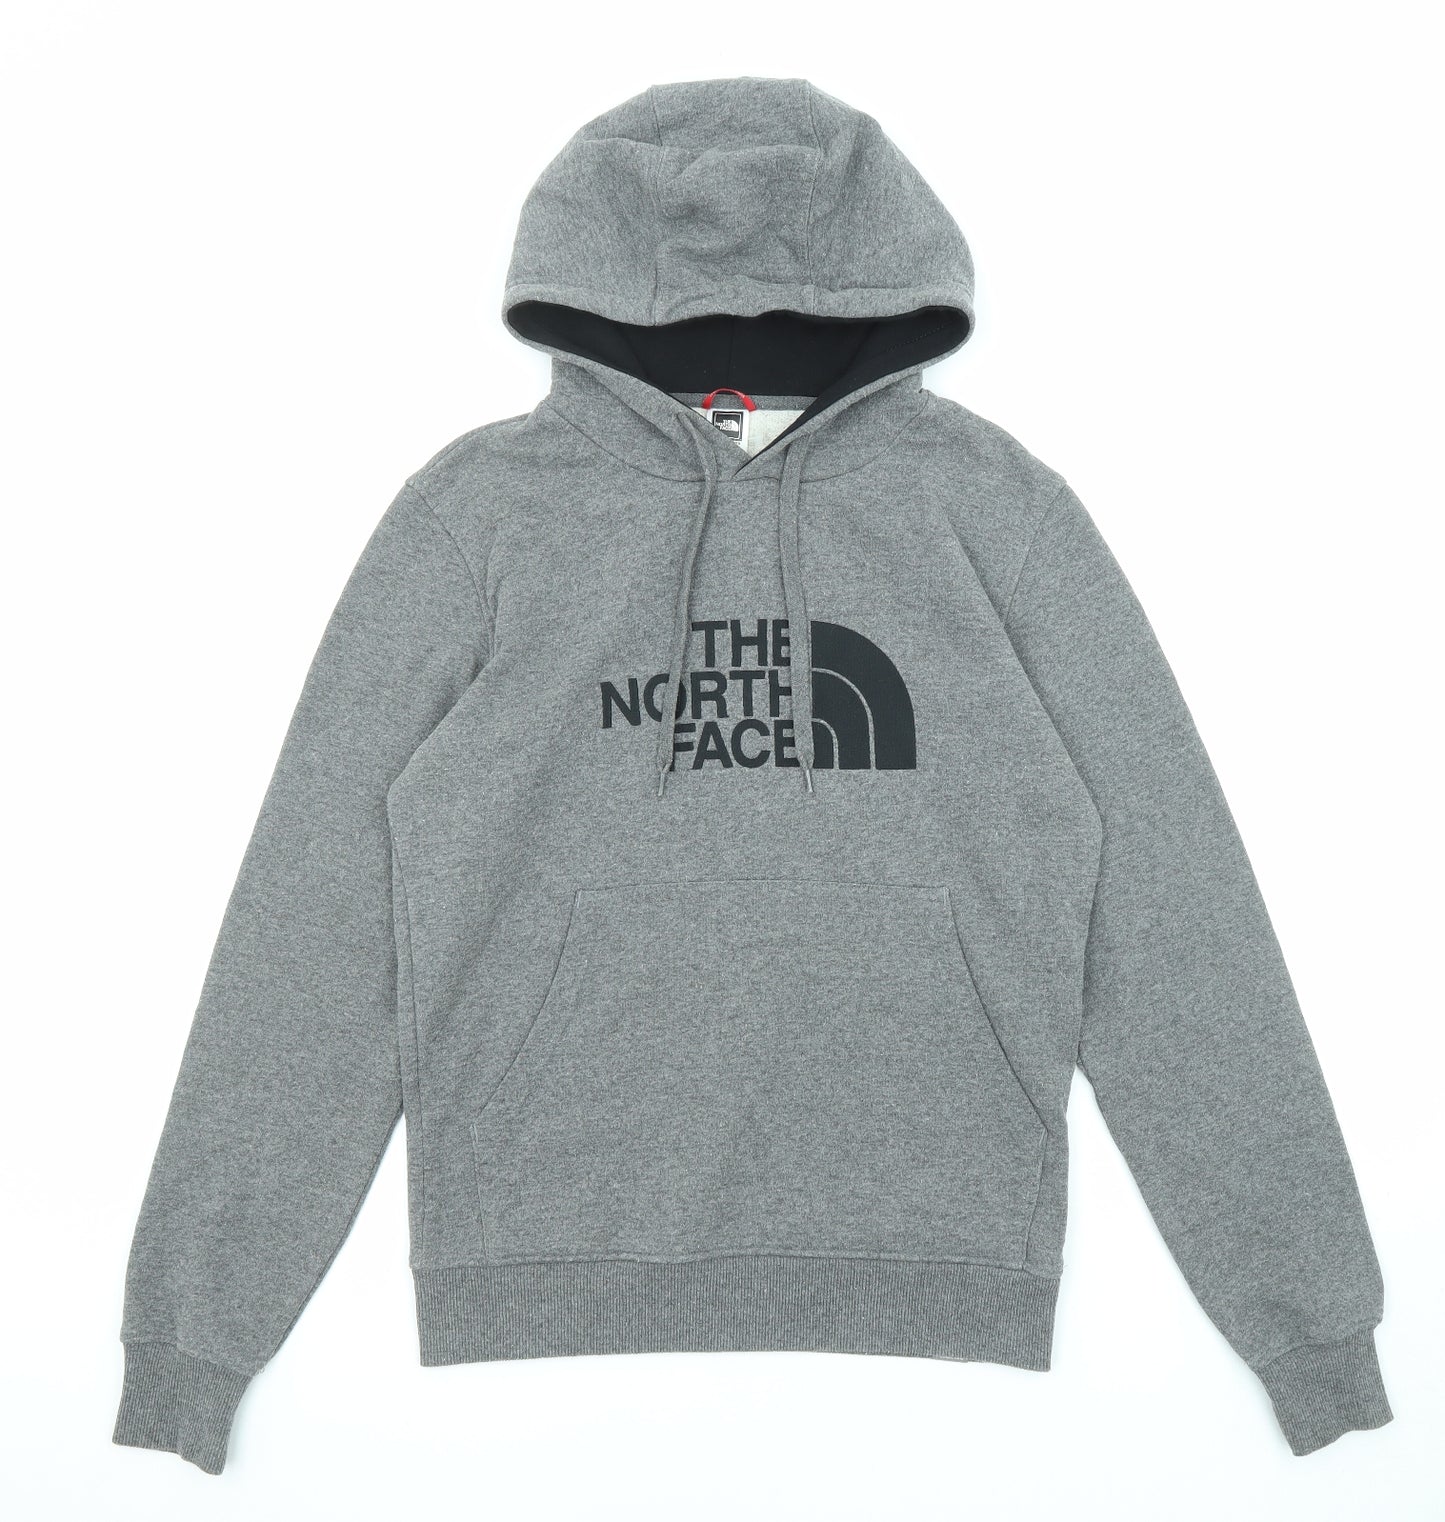 The North Face Mens Grey Cotton Pullover Hoodie Size S